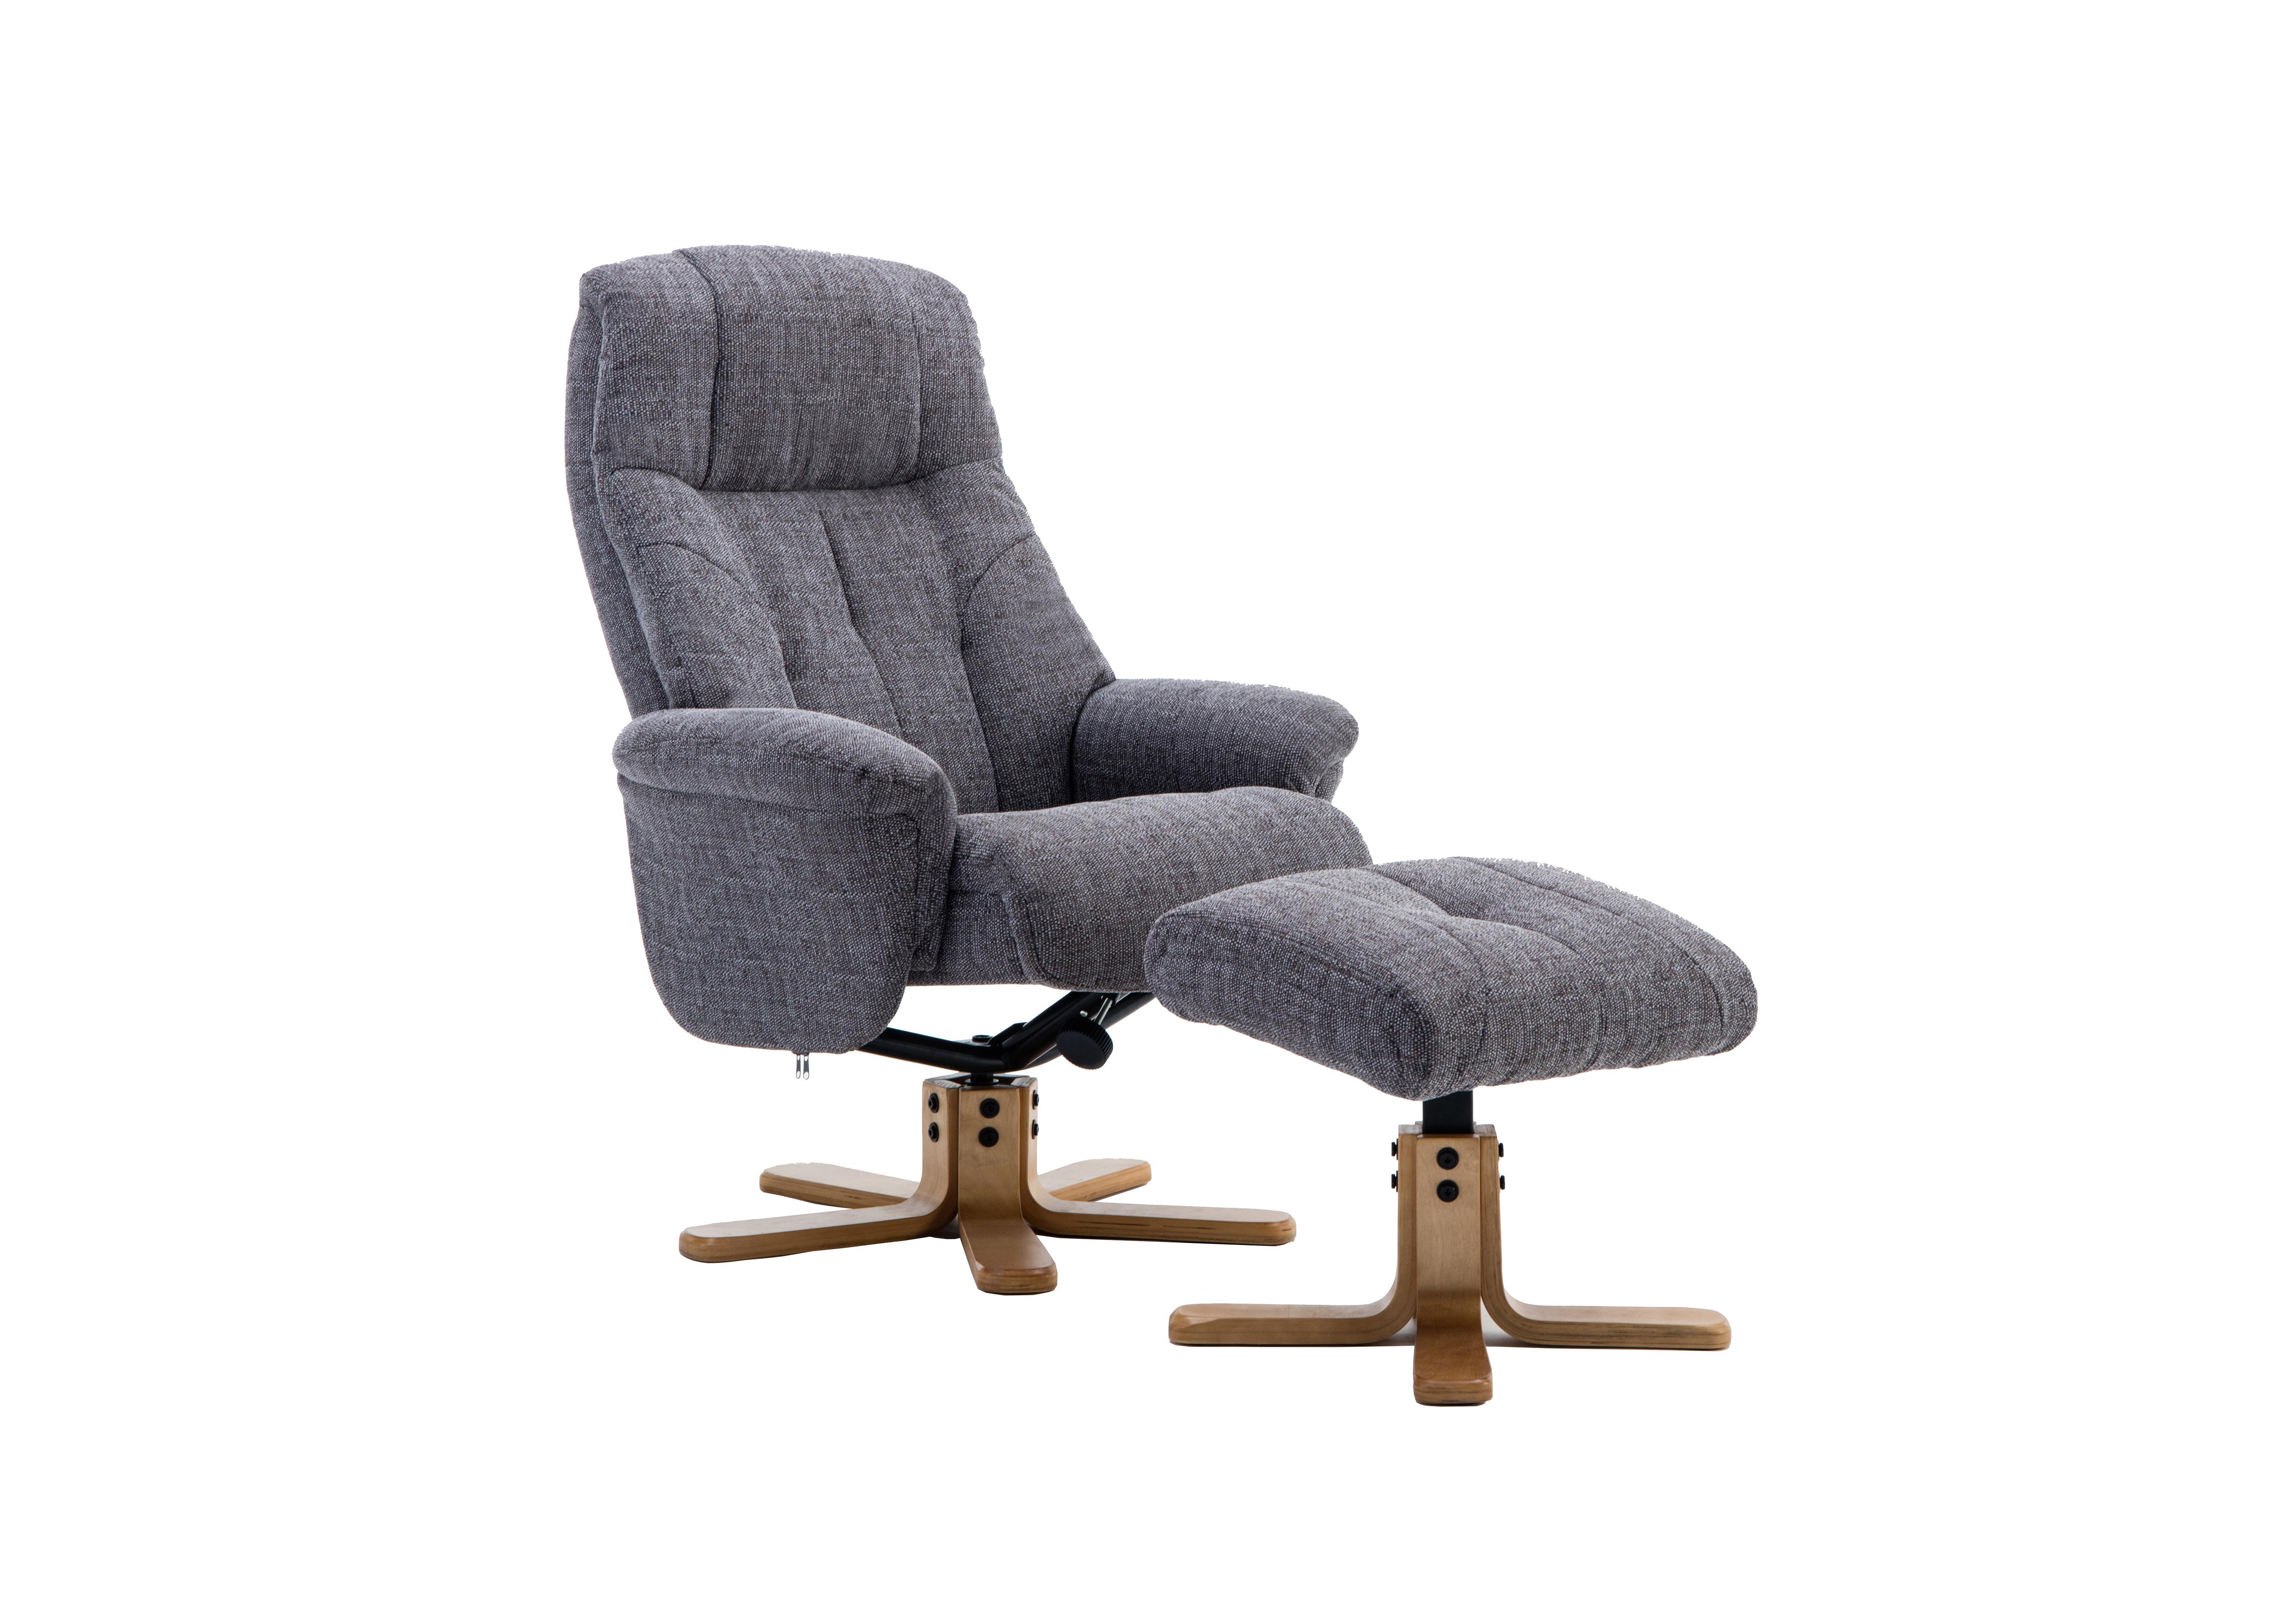 Muscat Fabric Swivel Recliner Chair with Footstool in Lisbon Grey on Furniture Village